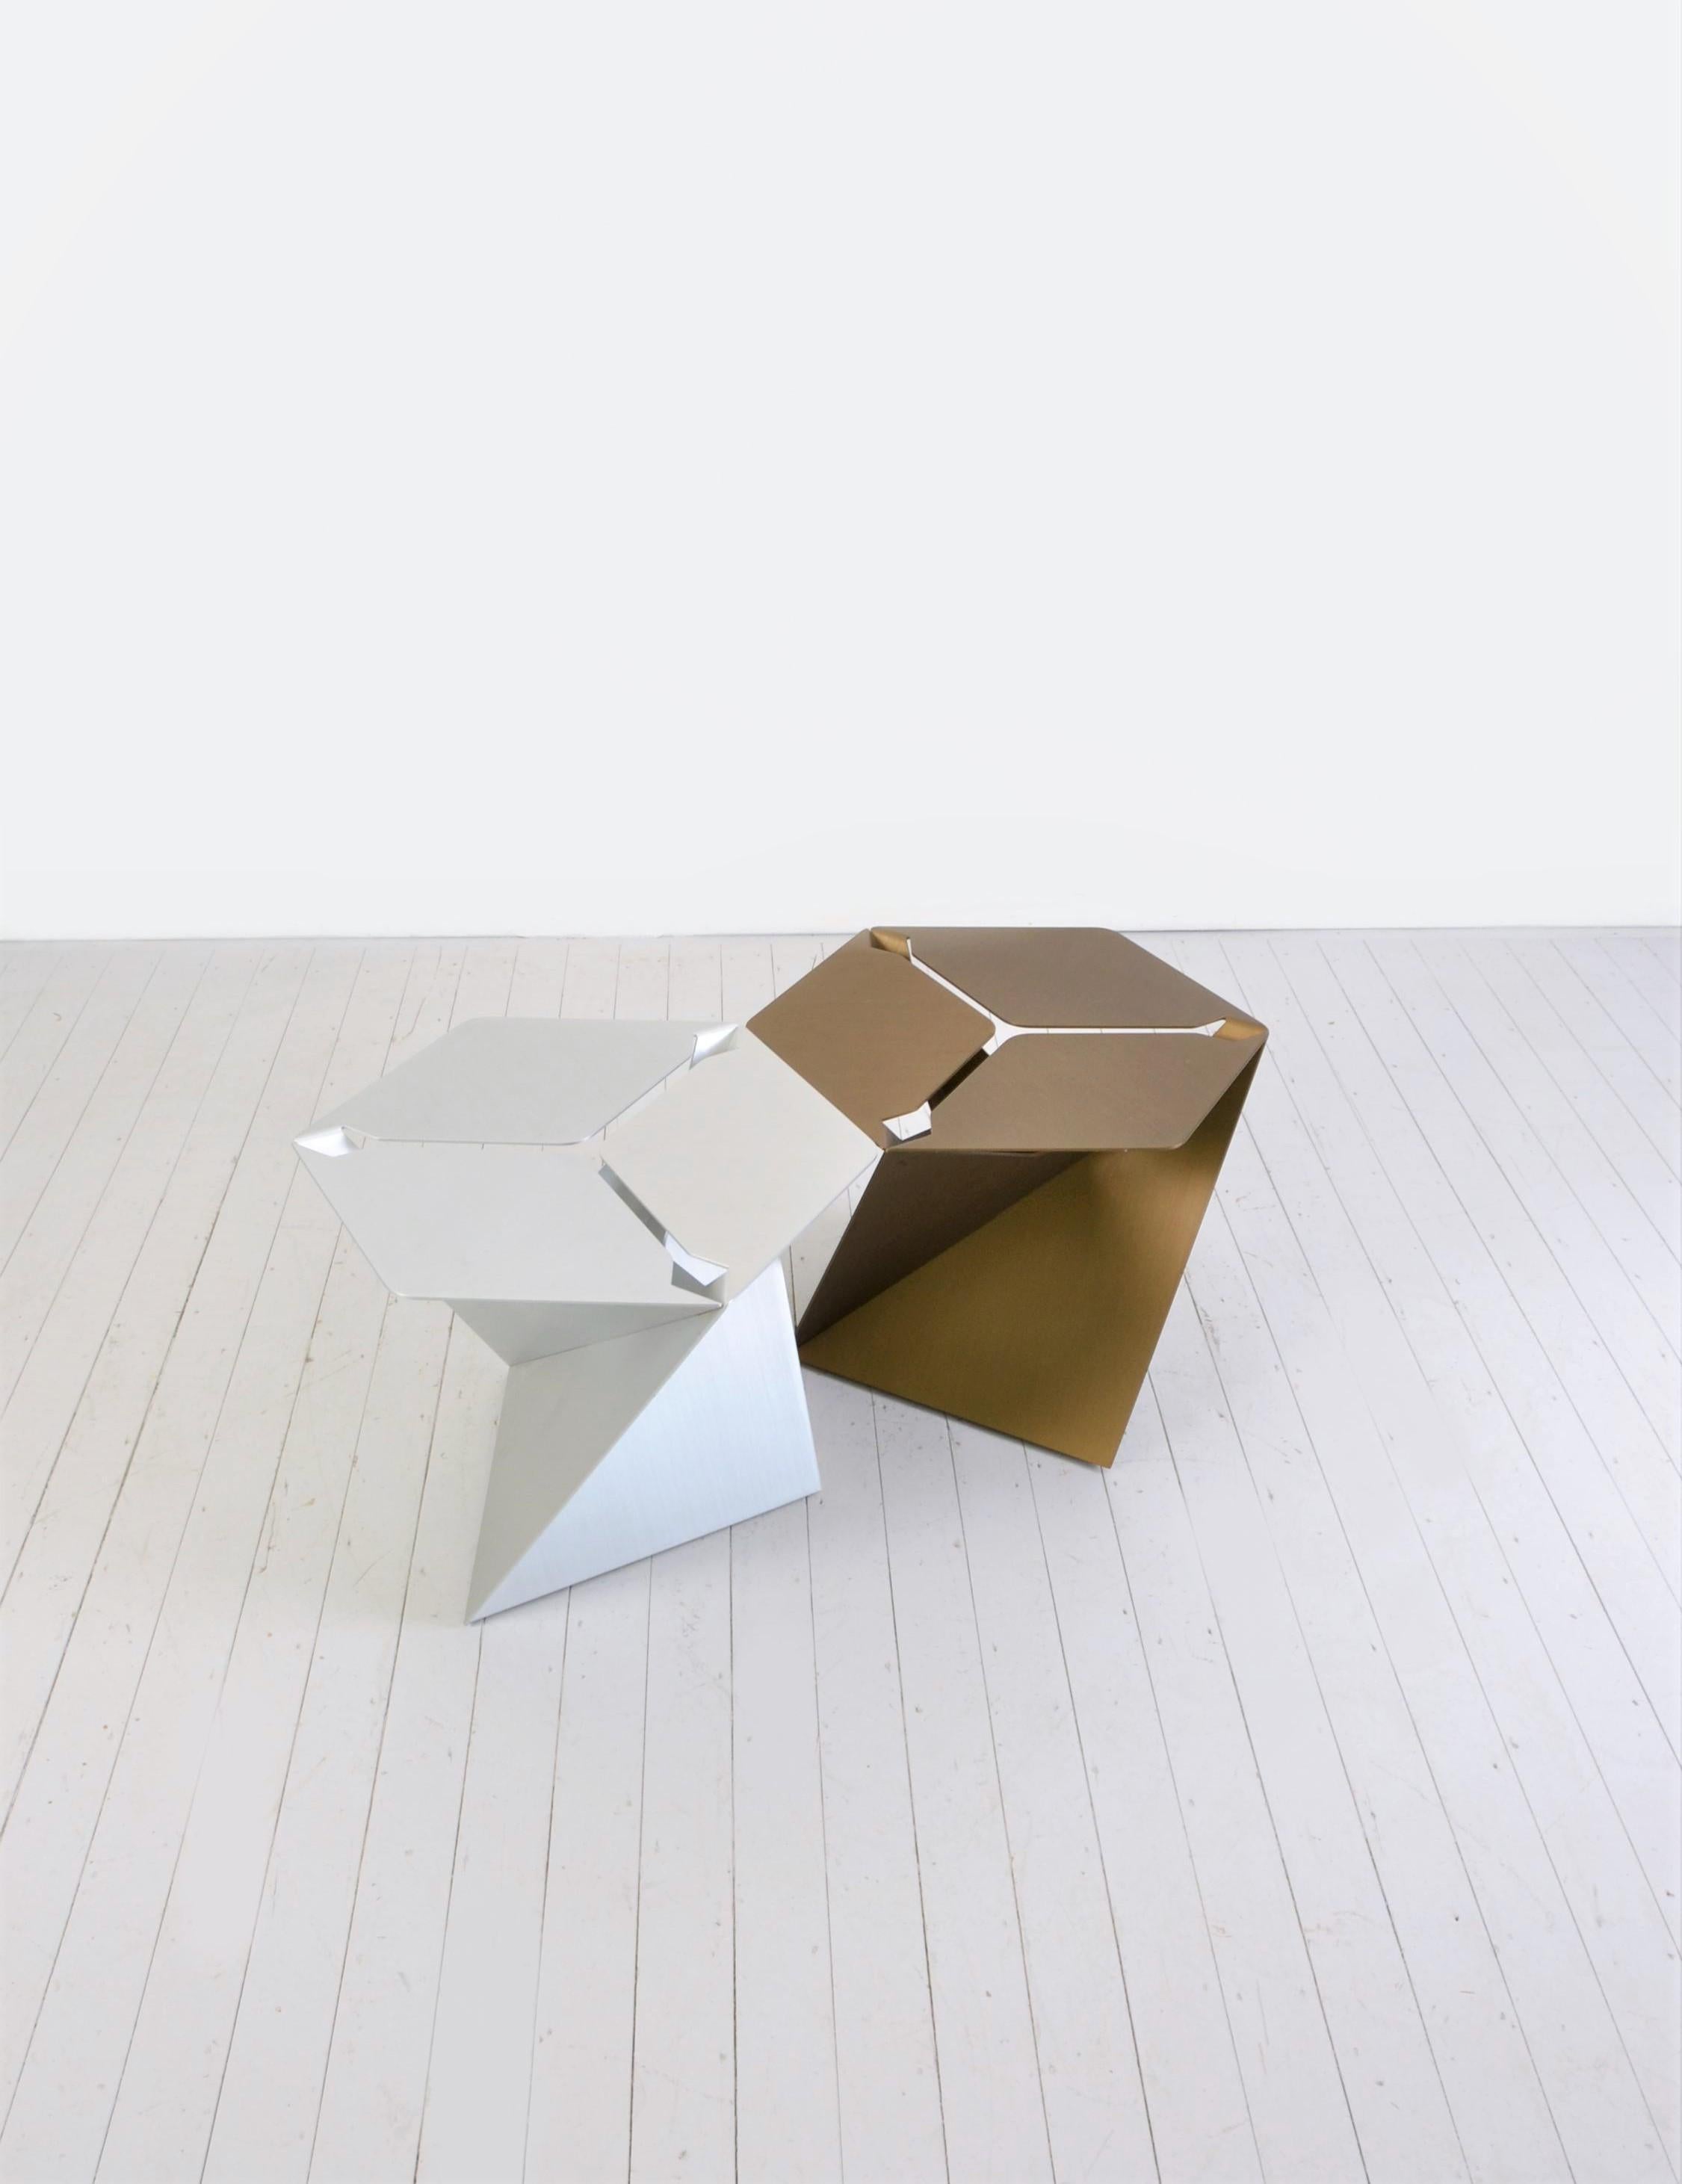 Very rare (only produced 2010-2012) Hexagonal coffee table made of three identical, interlocking folded aluminum sheets.
Available in two anodized colors: natural aluminum, bronze
Material: anodized aluminum
Price is per Piece.